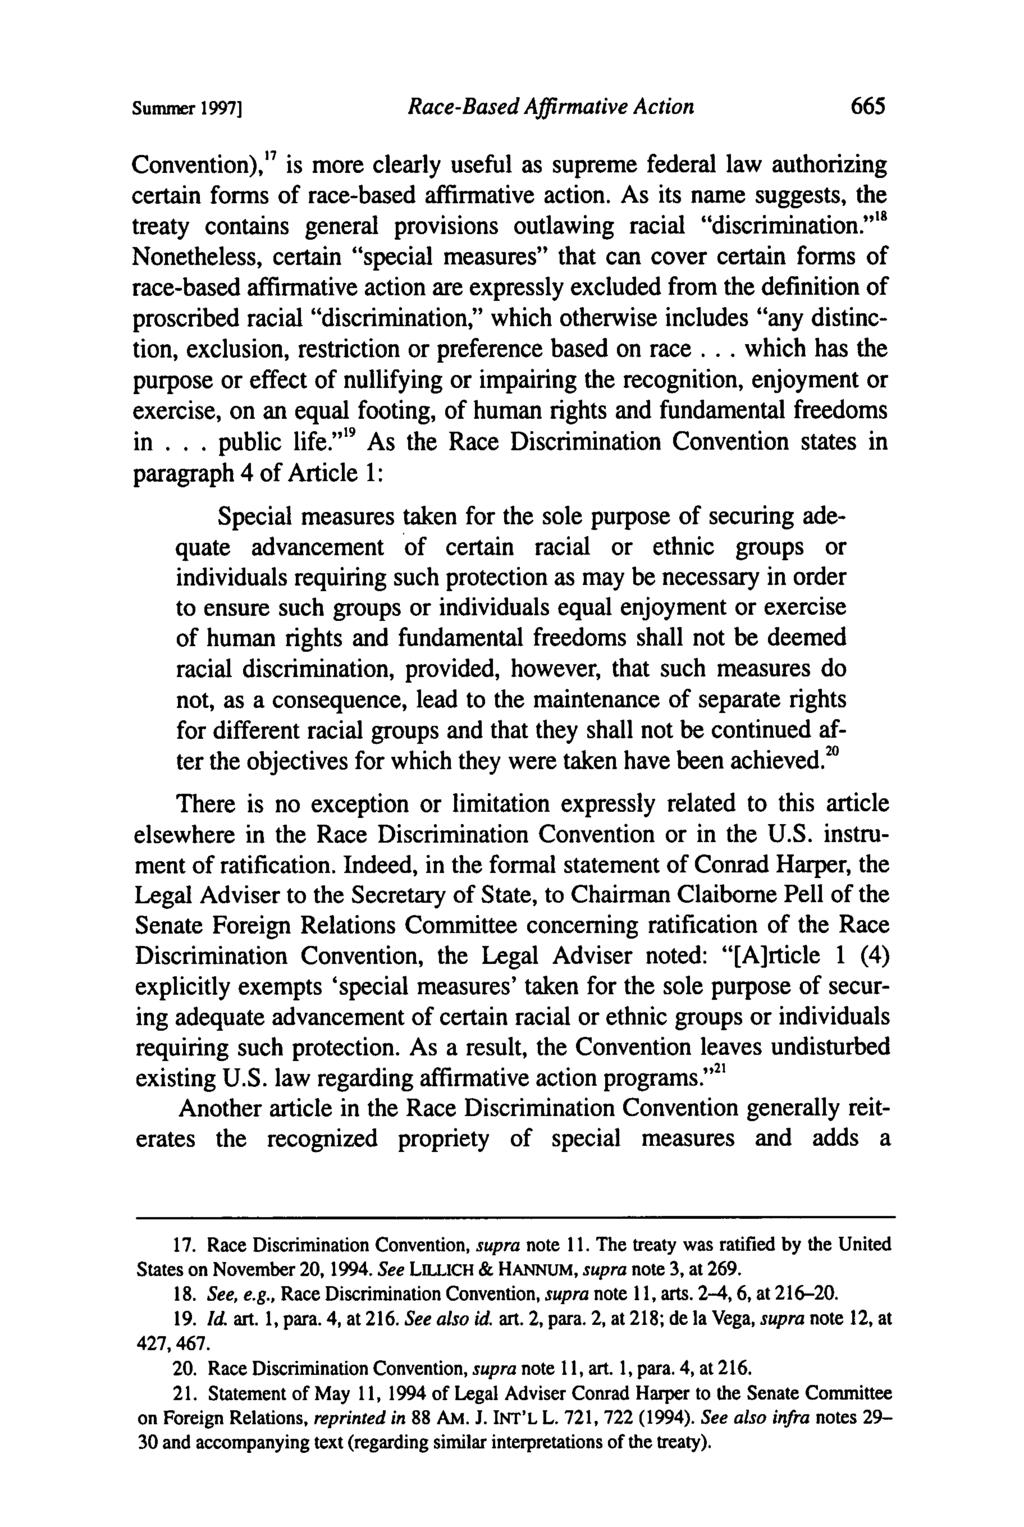 Summer 1997] Race-Based Affirmative Action Convention),' 7 is more clearly useful as supreme federal law authorizing certain forms of race-based affirmative action.